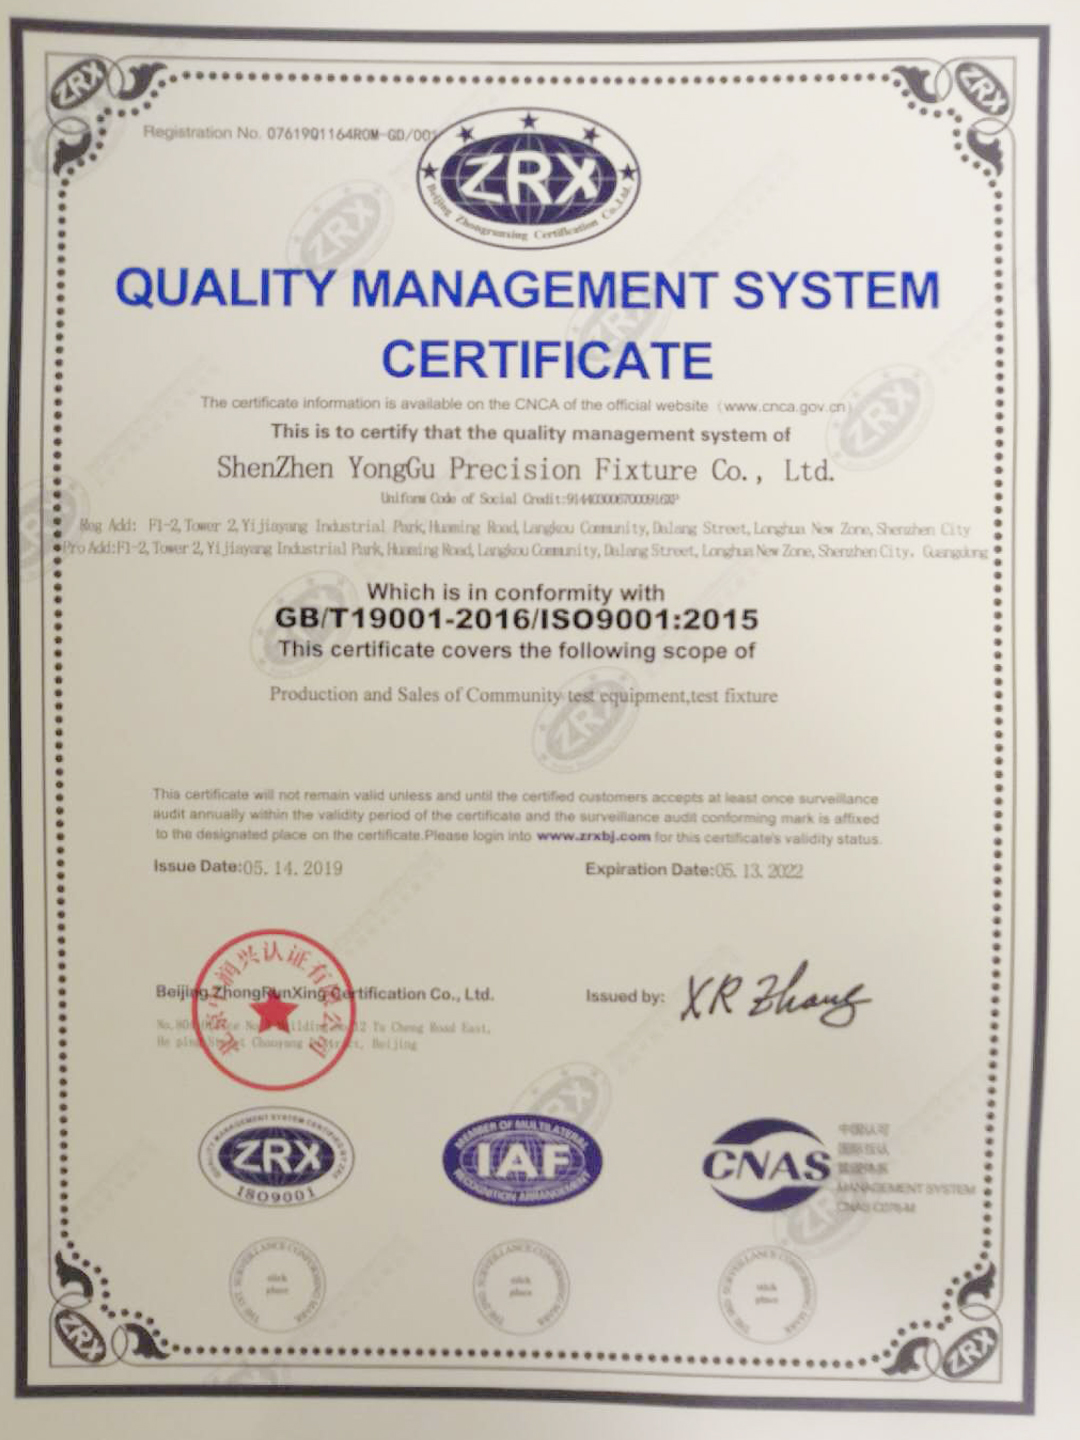 Quality management system certification 0761901164ROM-GD-001